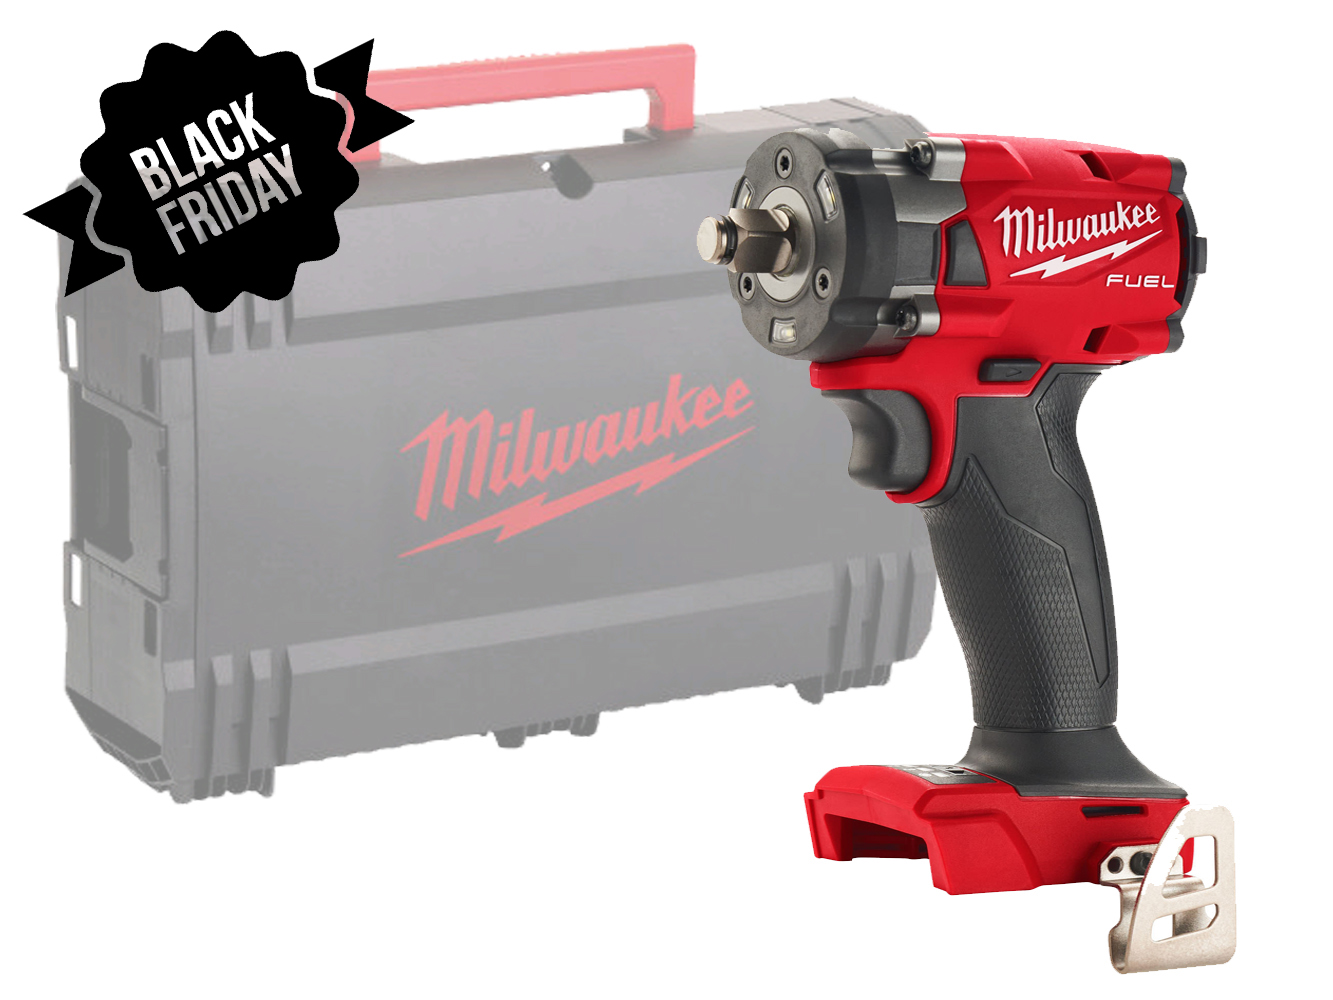 Milwaukee M18FIW2F12 18V Fuel Brushless 2nd Gen 1/2in Impact Wrench - Body Only